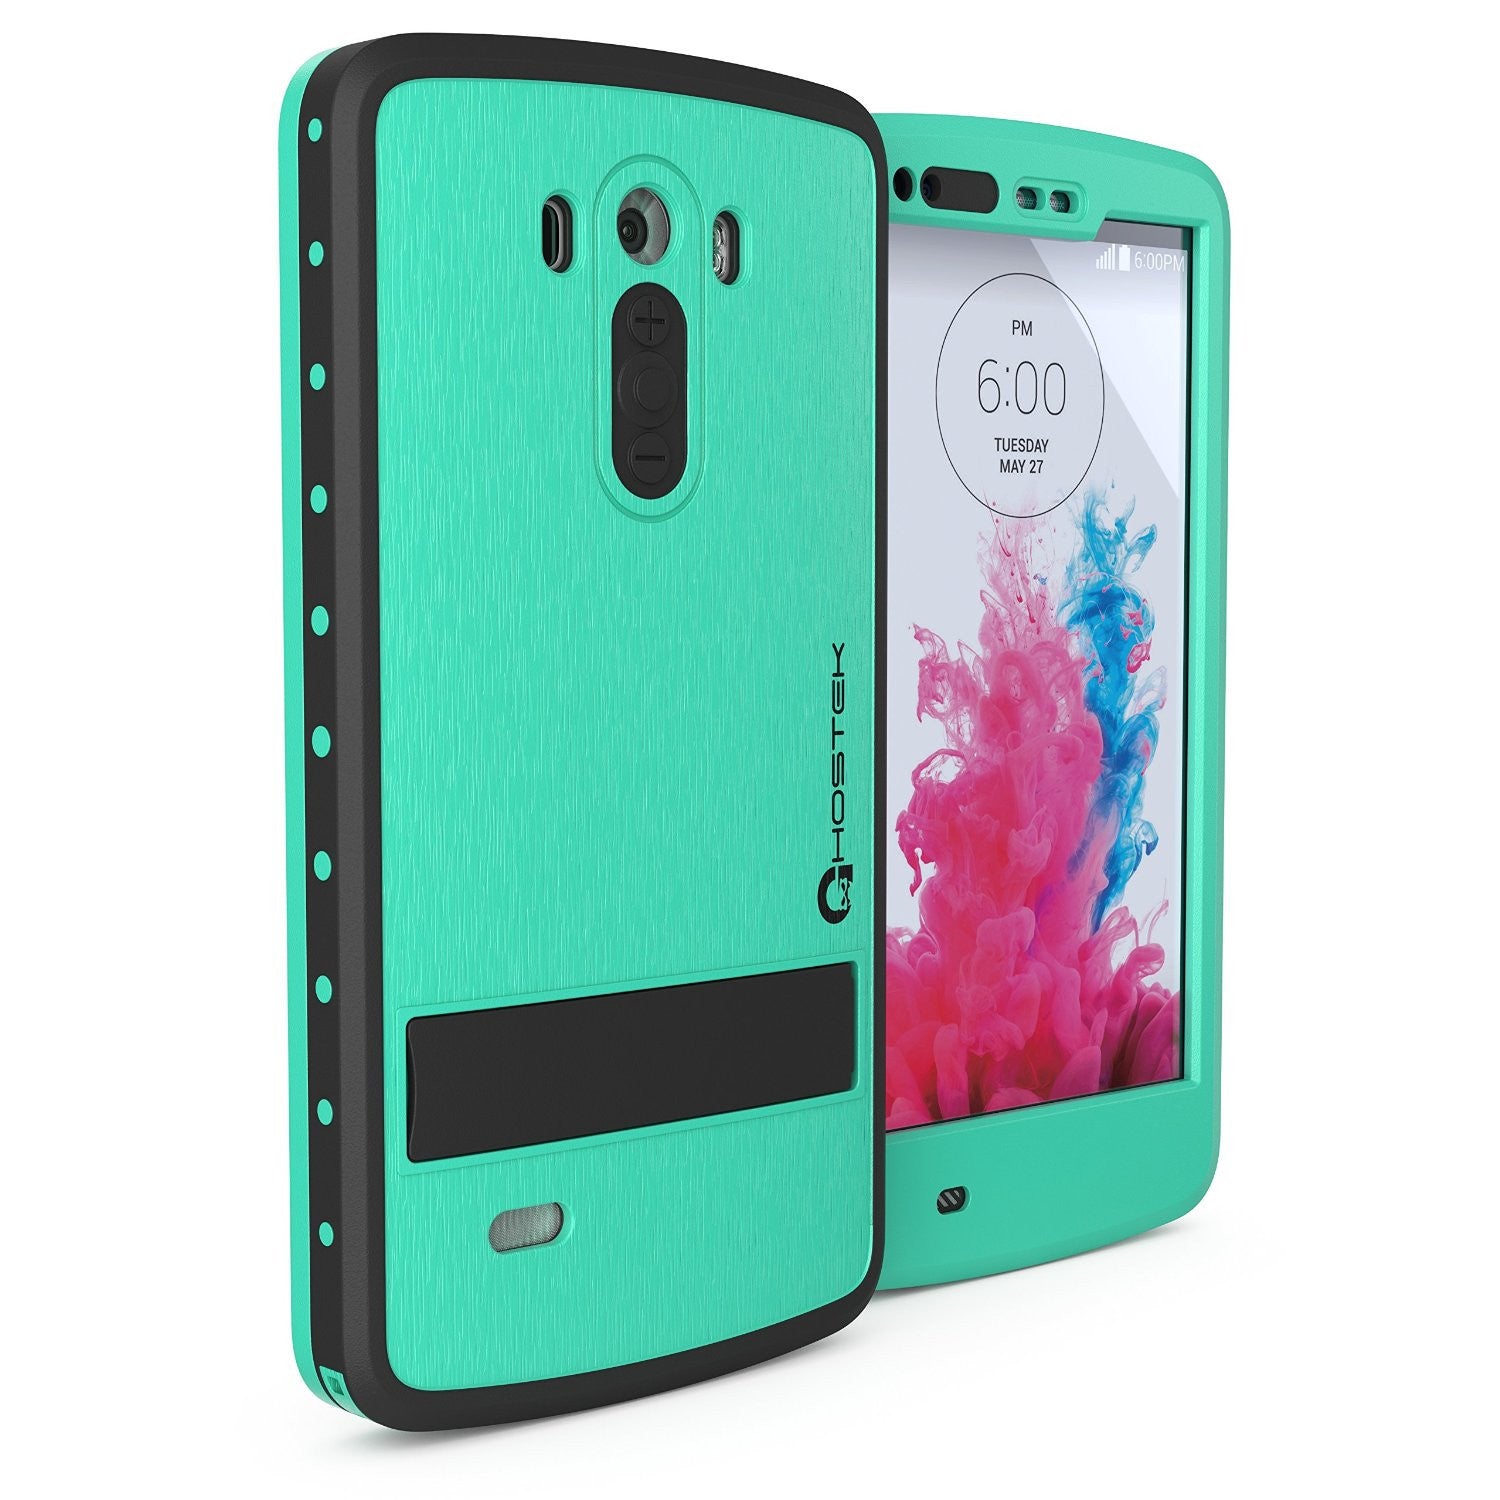 LG G3 Waterproof Case, Ghostek Atomic Teal W/ Attached Screen Protector  Slim Fitted  LG G3 (Color in image: teal)